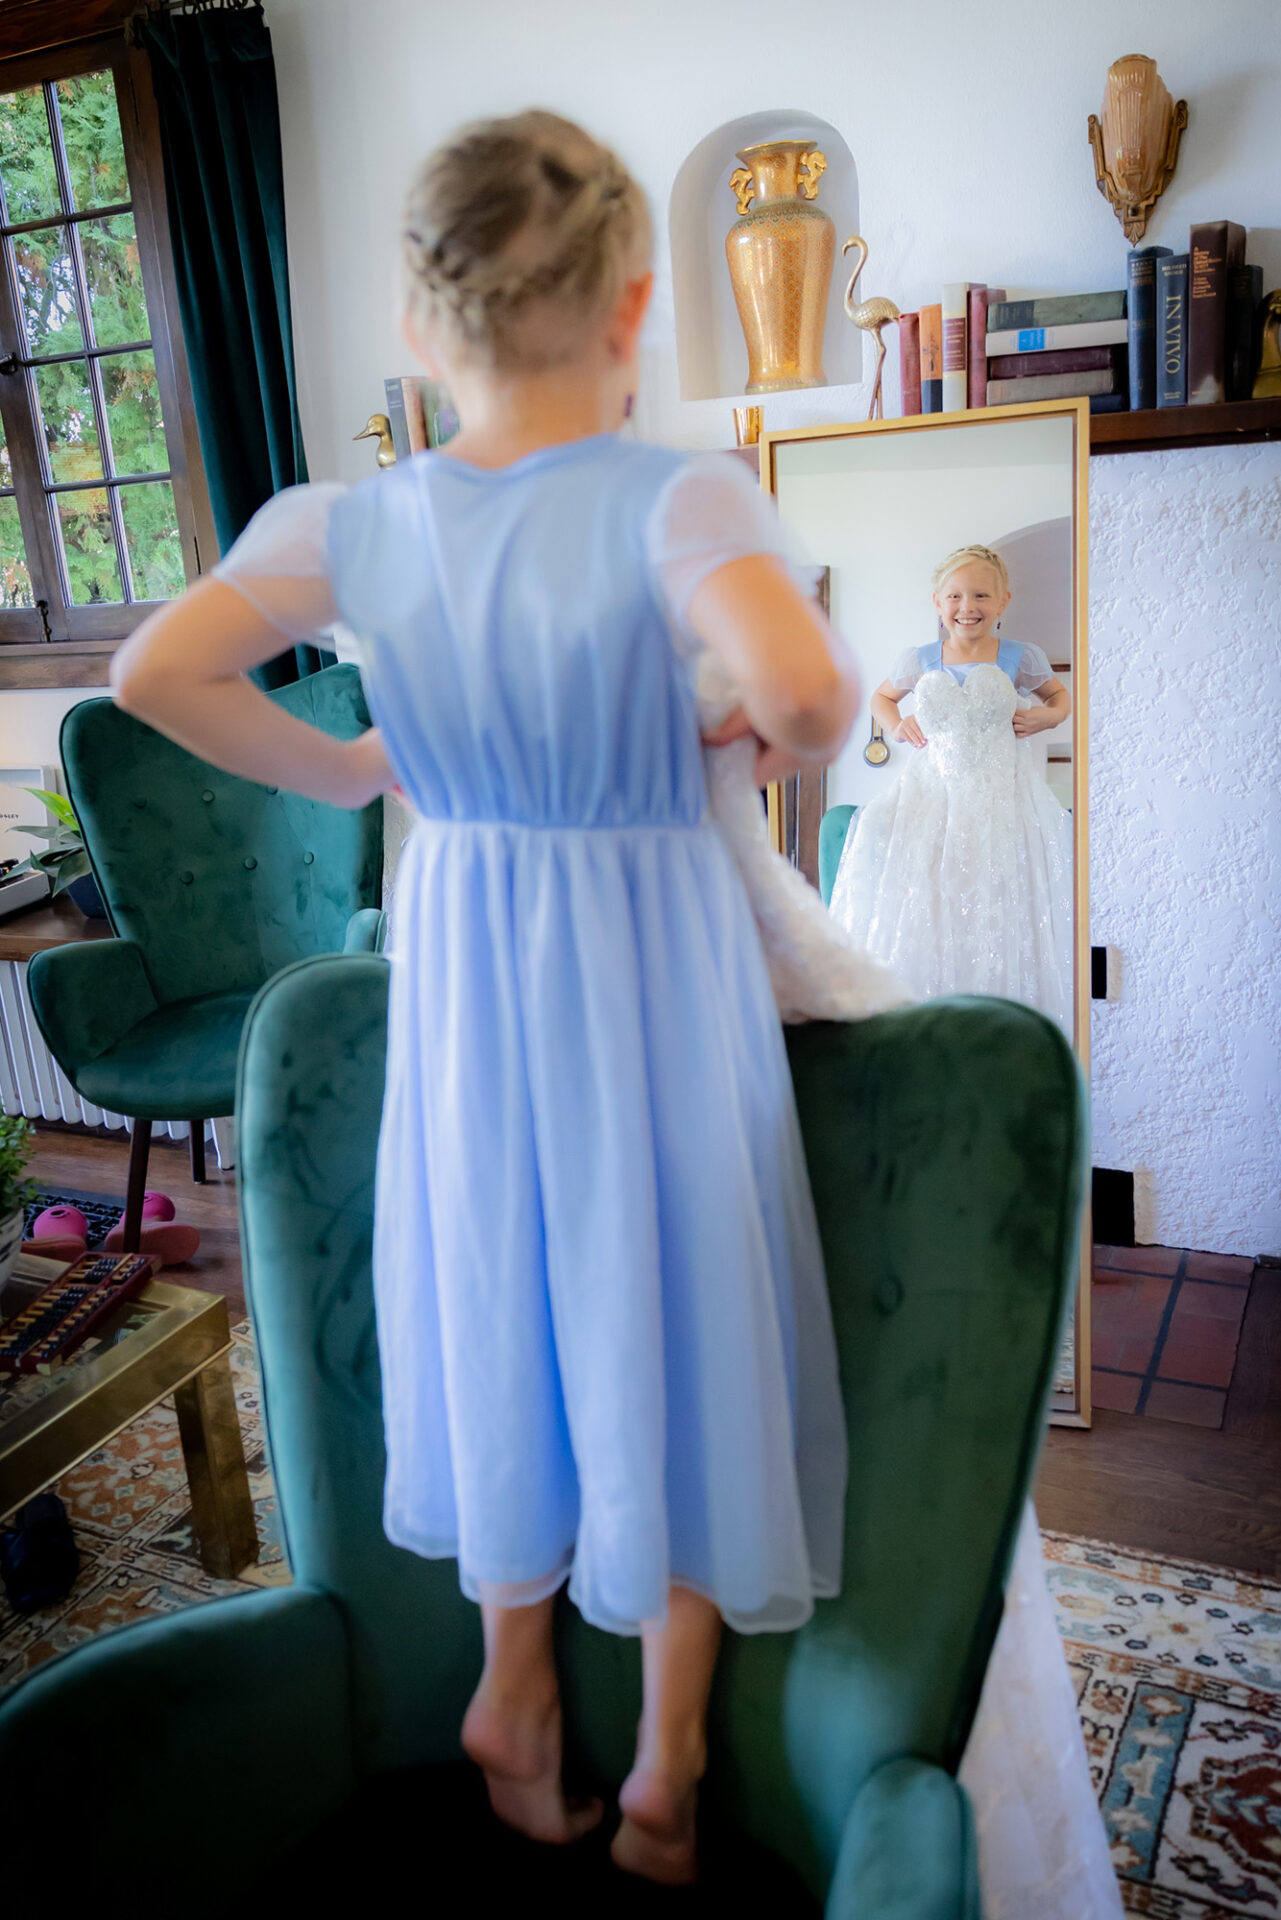 A young girl trying on a wedding gown